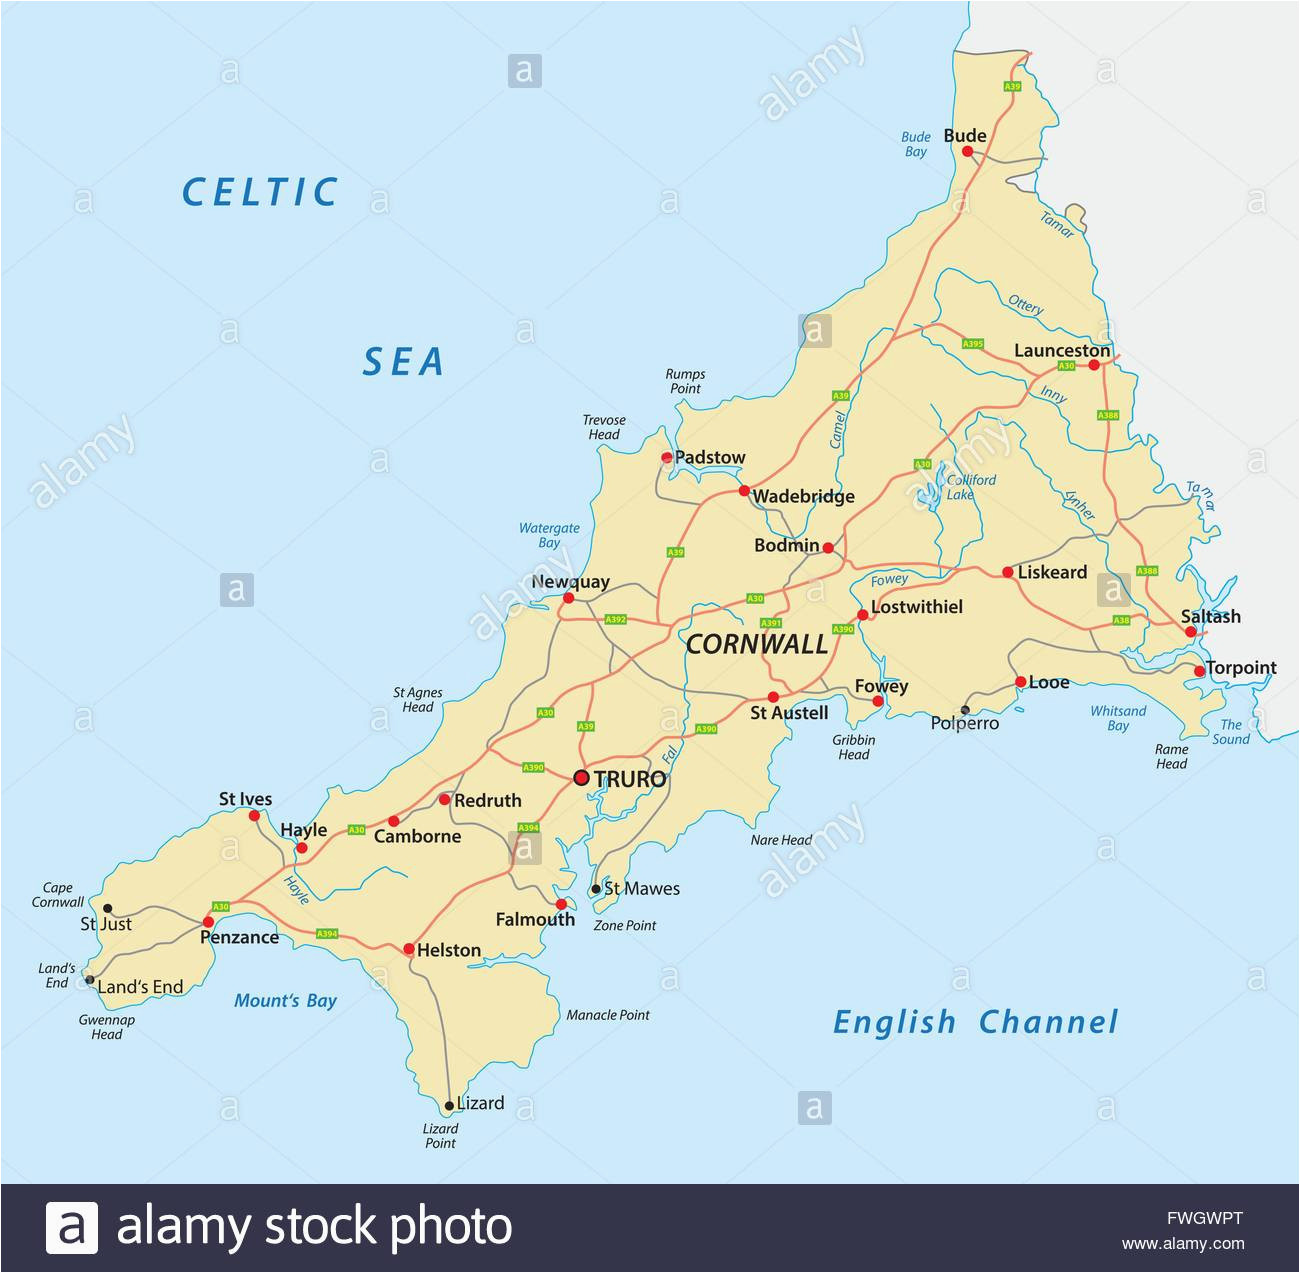 english channel map stock photos english channel map stock